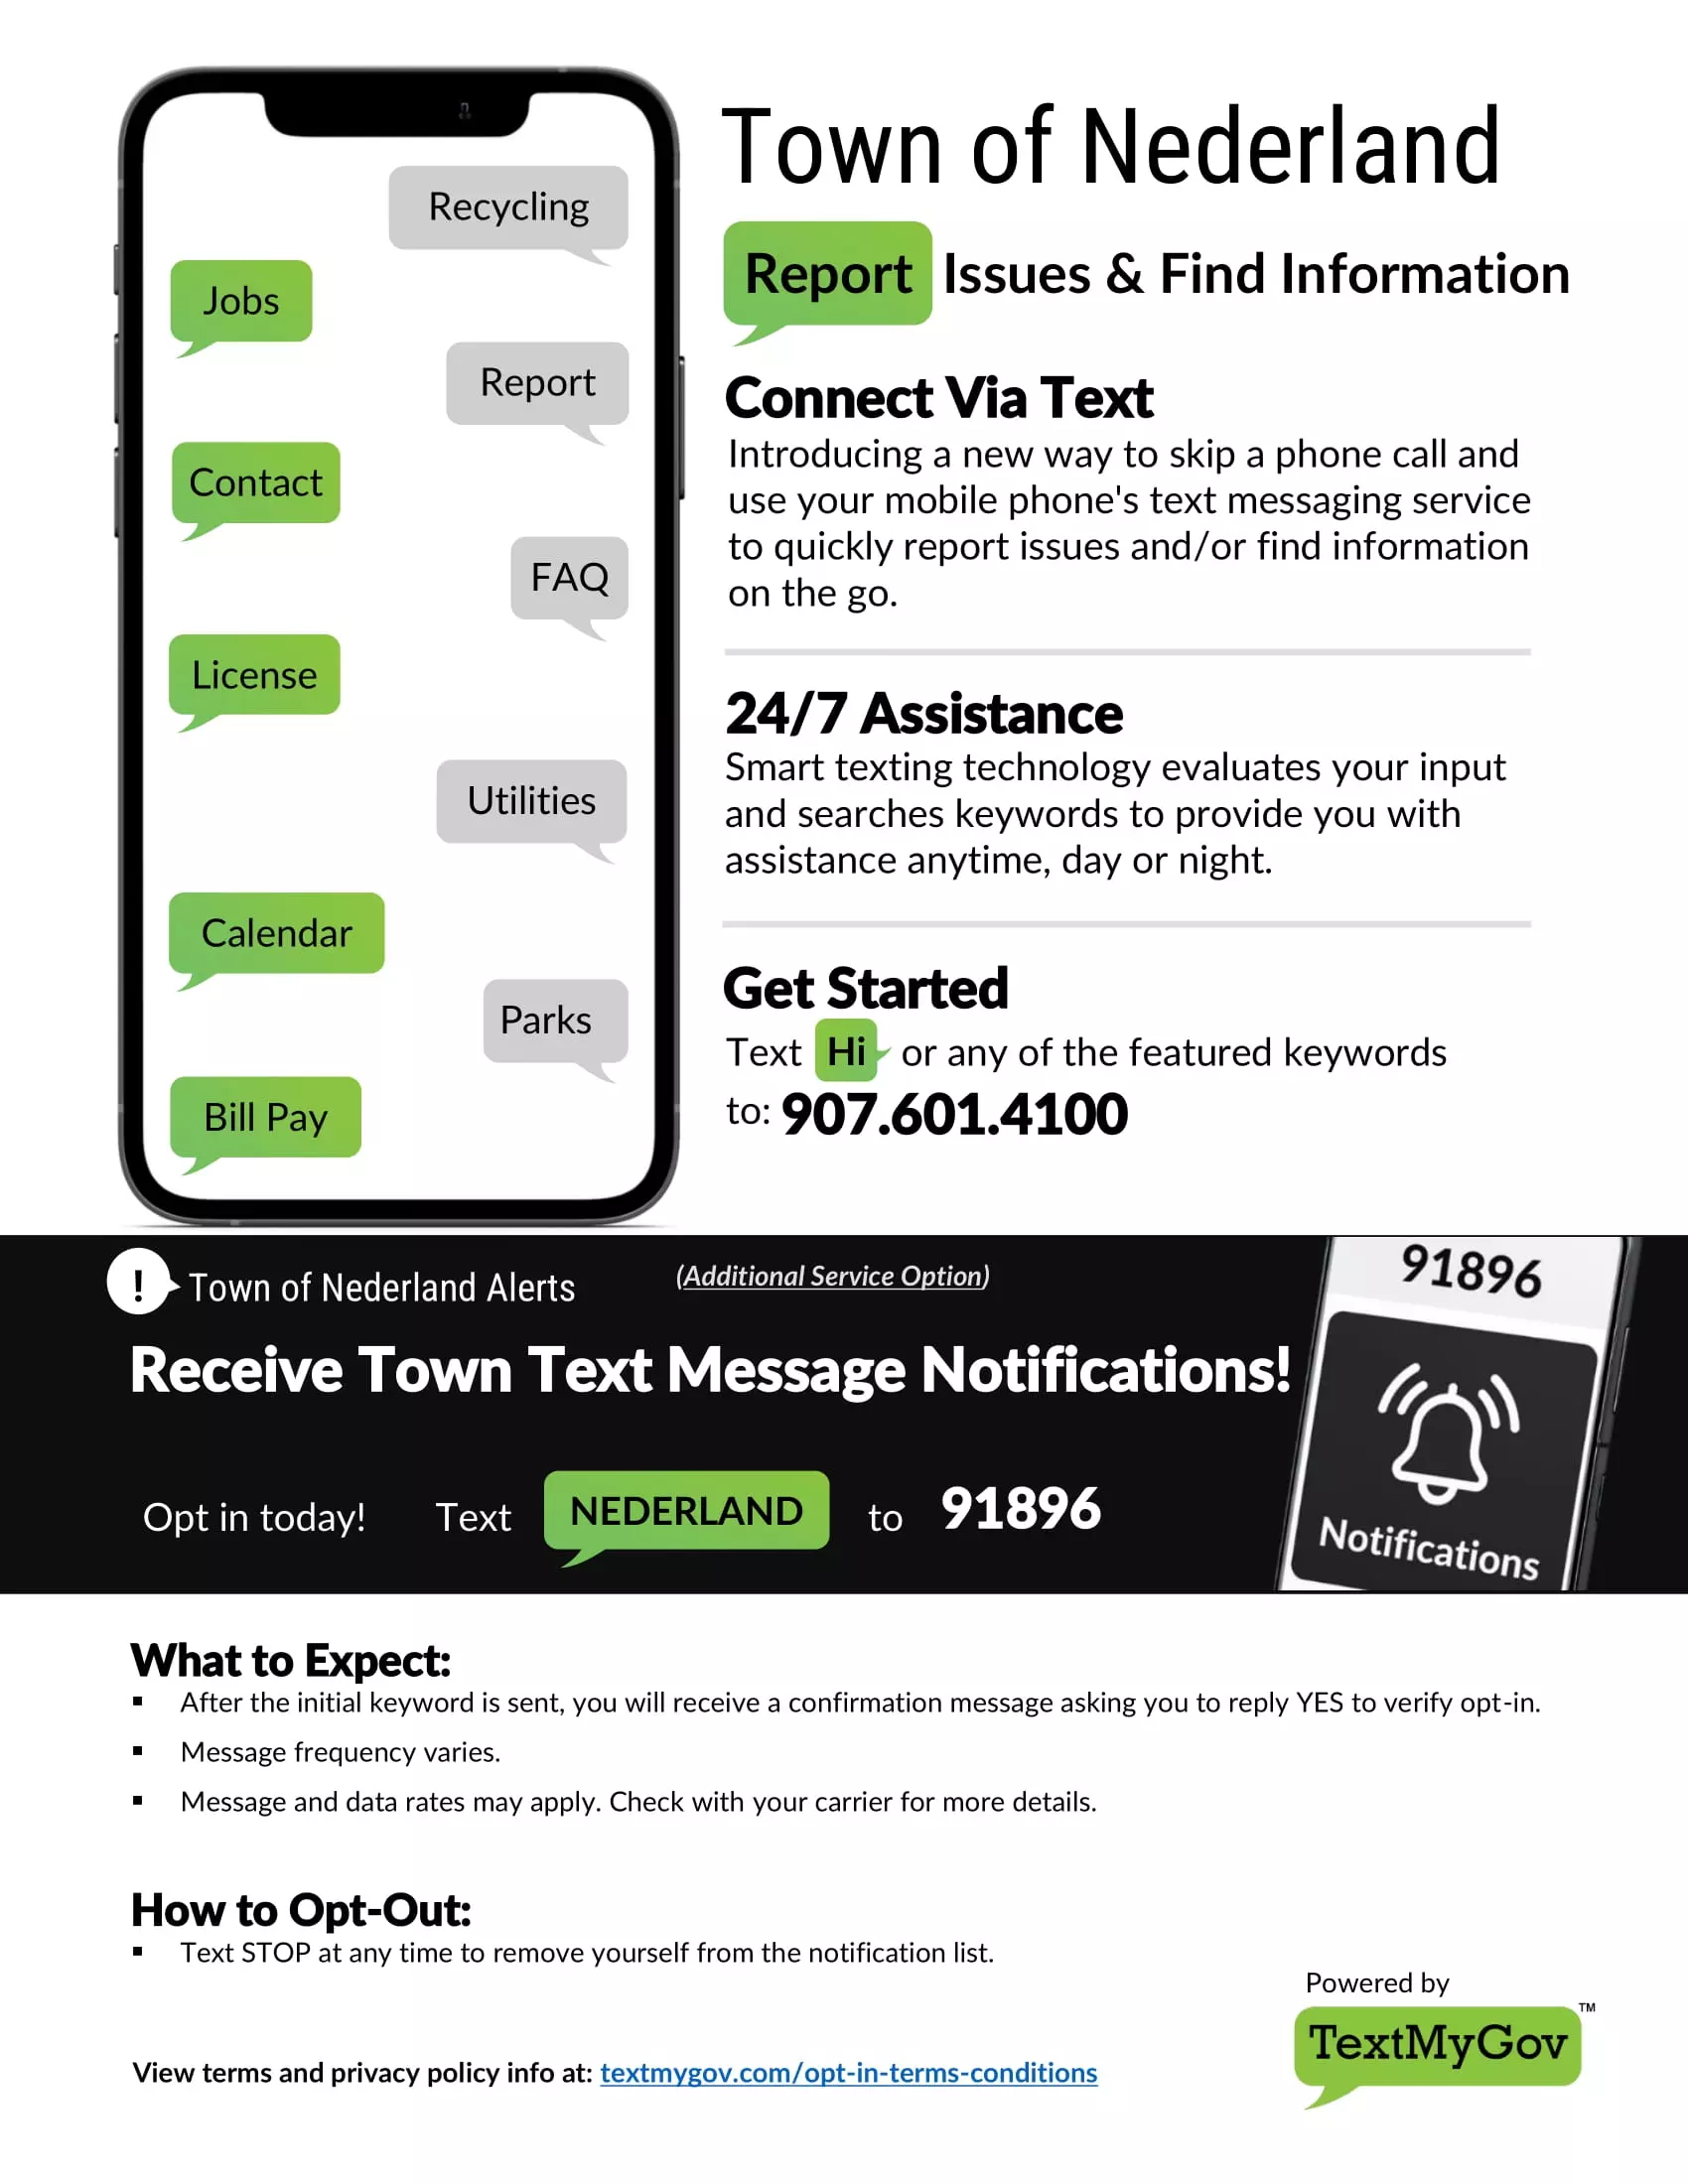 Report Issues & Find Information - Text Hi to 907.601.4100 to get started. Receive Town Text Message Notifications! Text Nederland to 91896 to opt in!